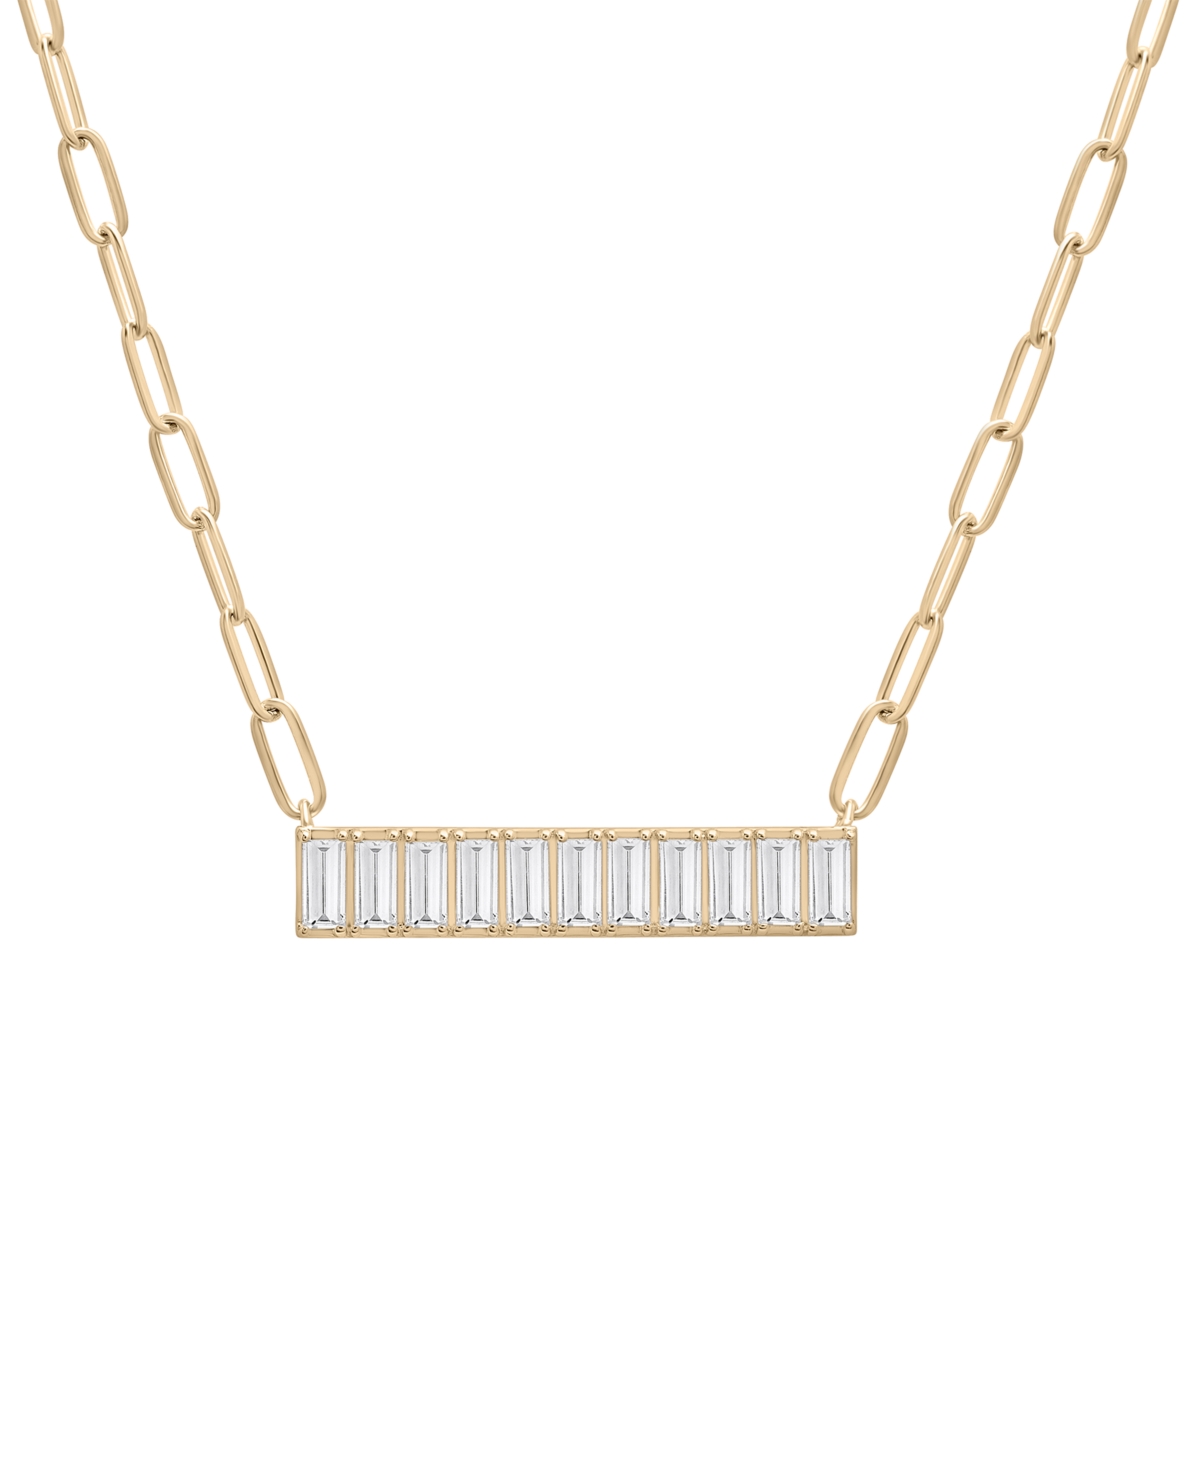 Shop Audrey By Aurate Nano Emerald Color Baguette Bar Pendant Necklace (1 Ct. T.w.) In Gold Vermeil, 17" (also In Nano Whi In White